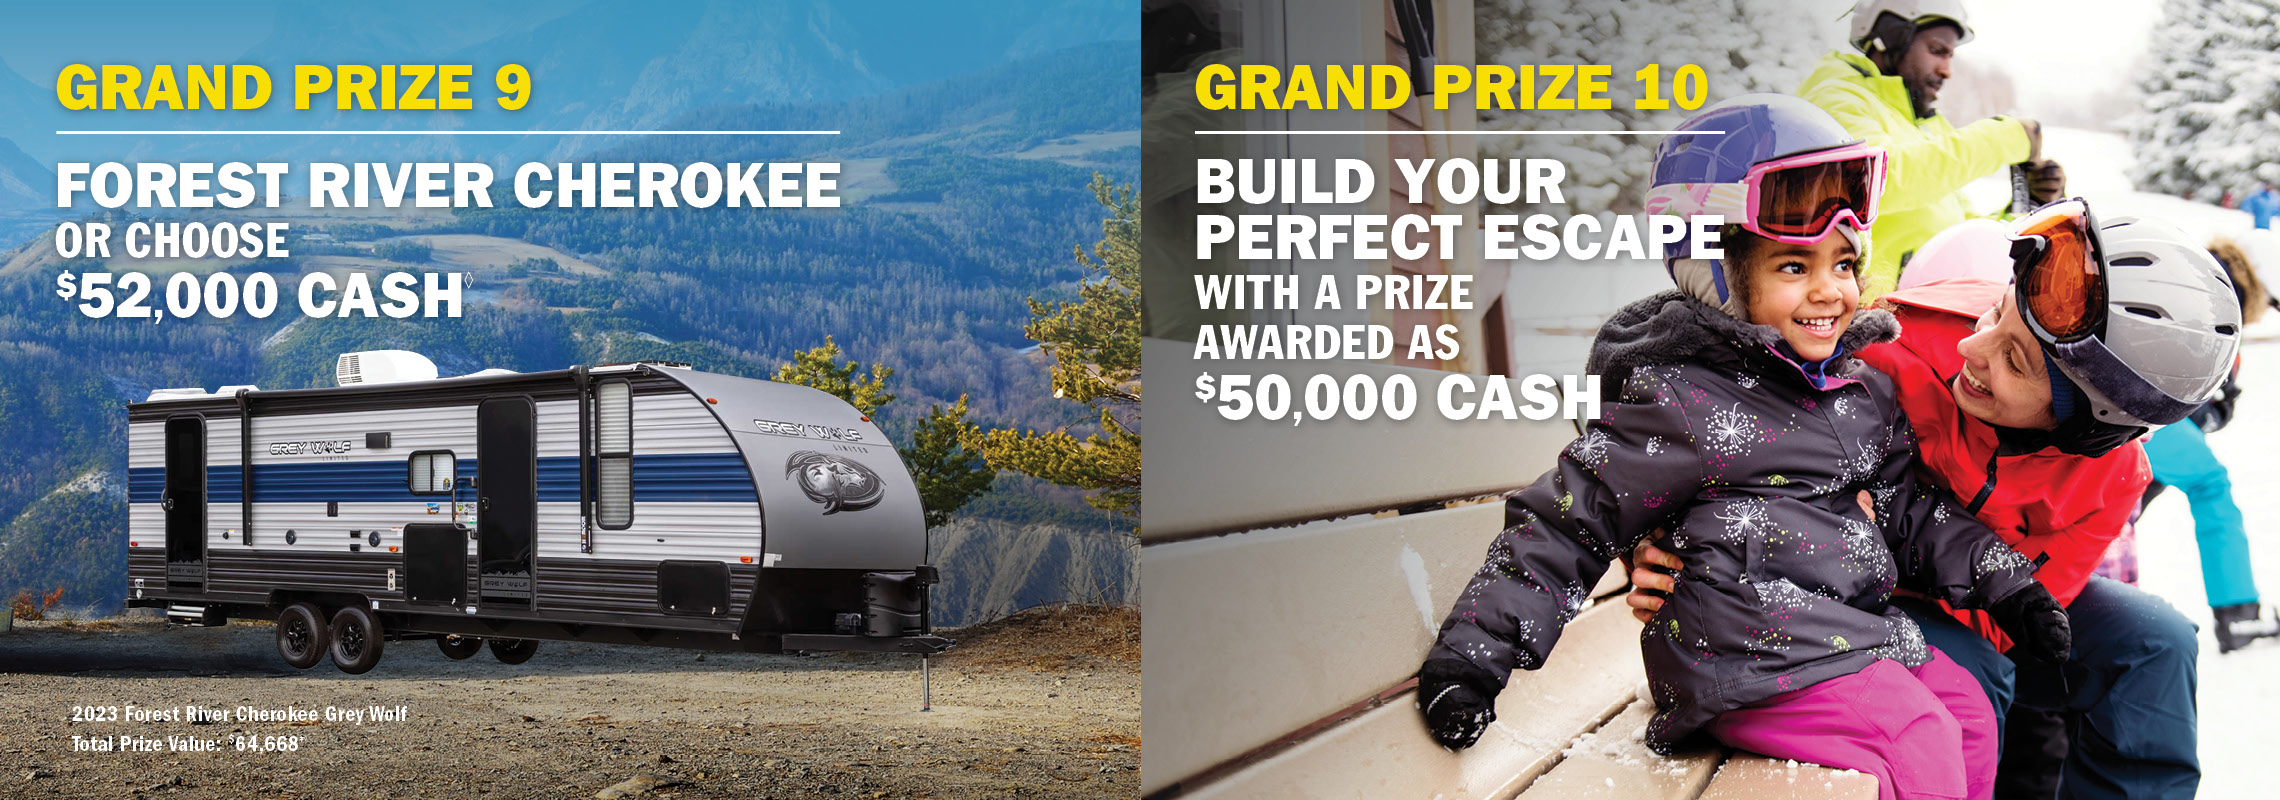 Grand Prize 9 - Forest River Cherokee or choose $52,000 cash. Grand Prize 10 - Build your perfect escape with $50,000 cash.